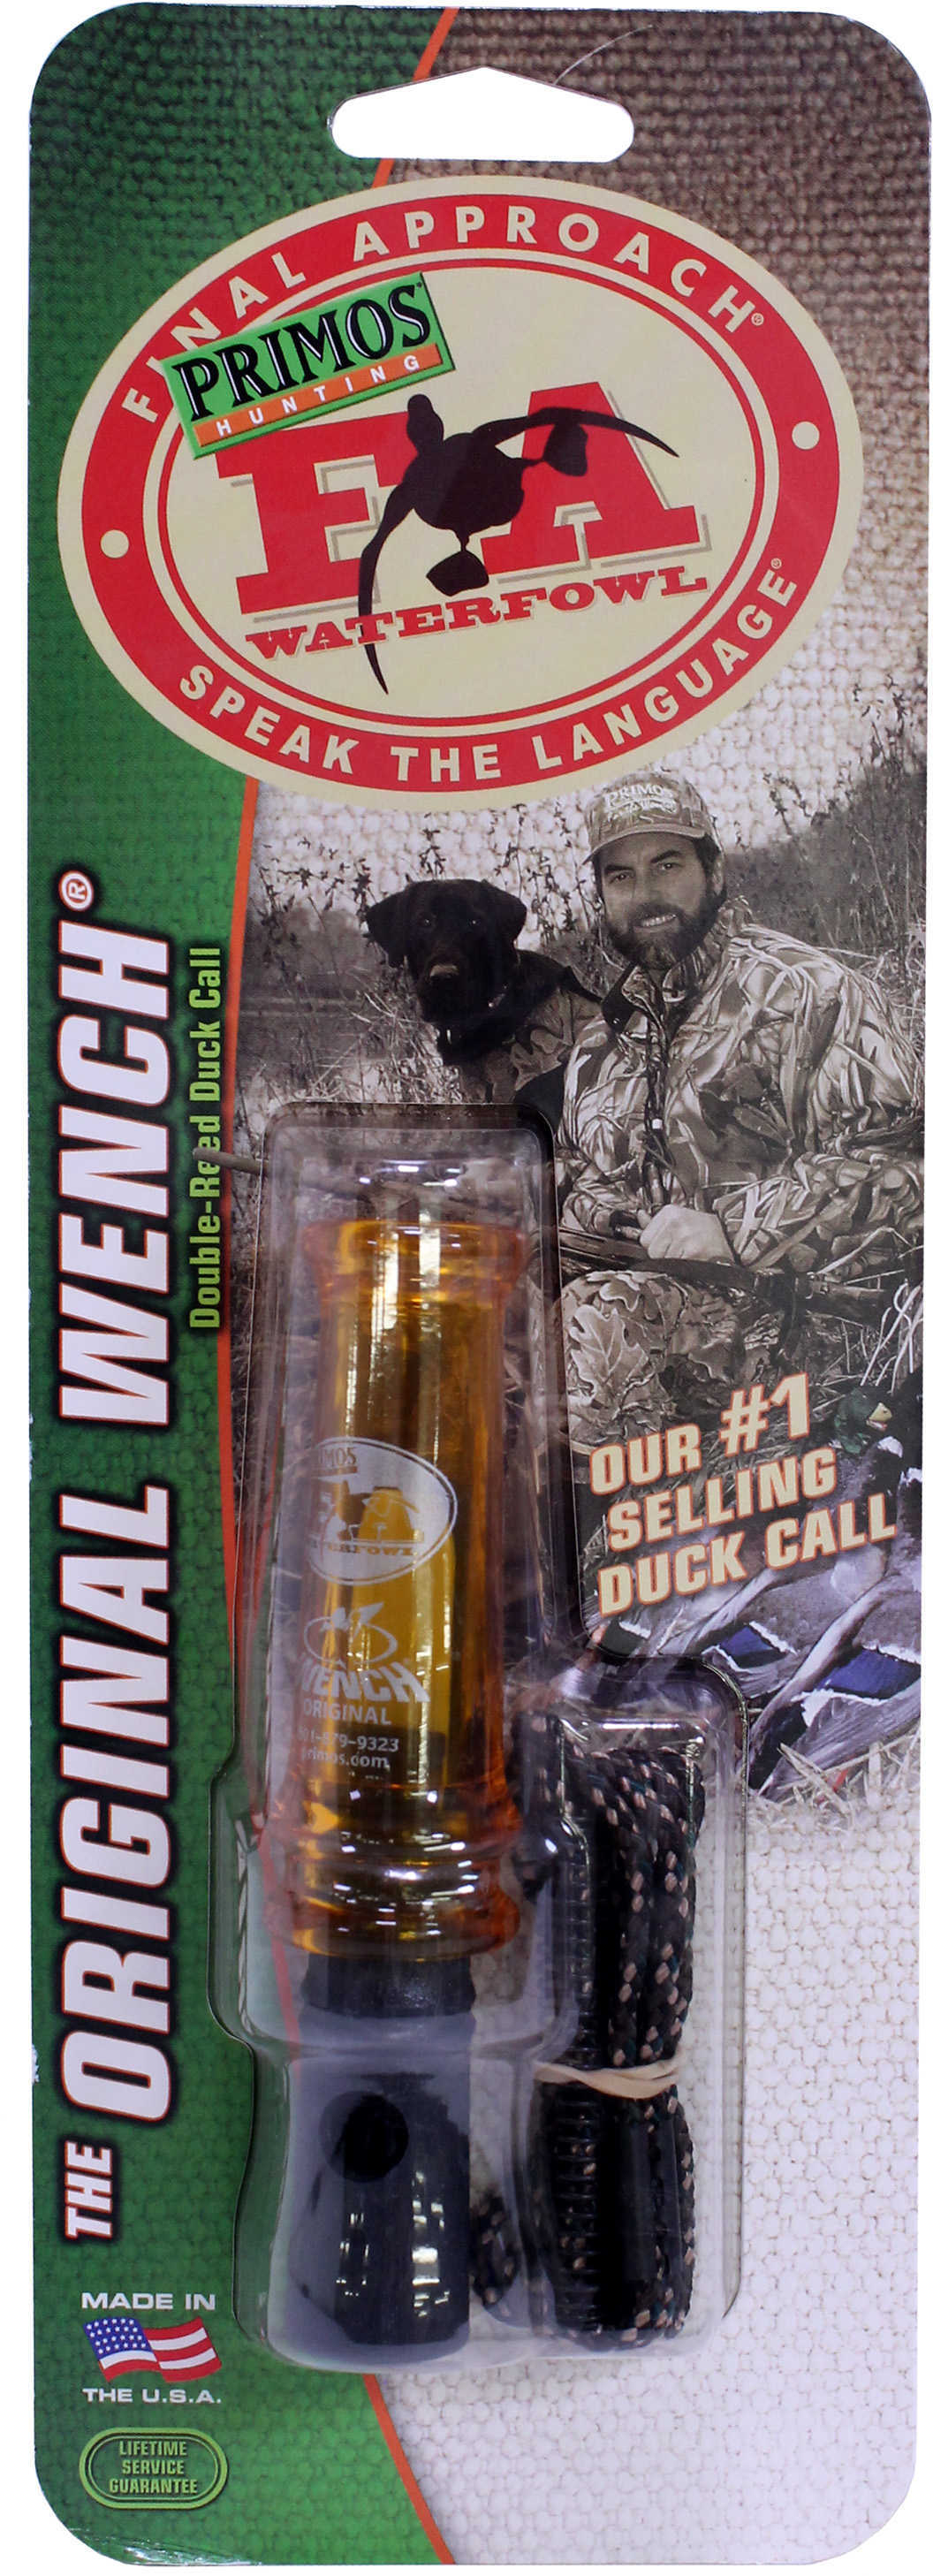 Primos Duck Call Md: 820